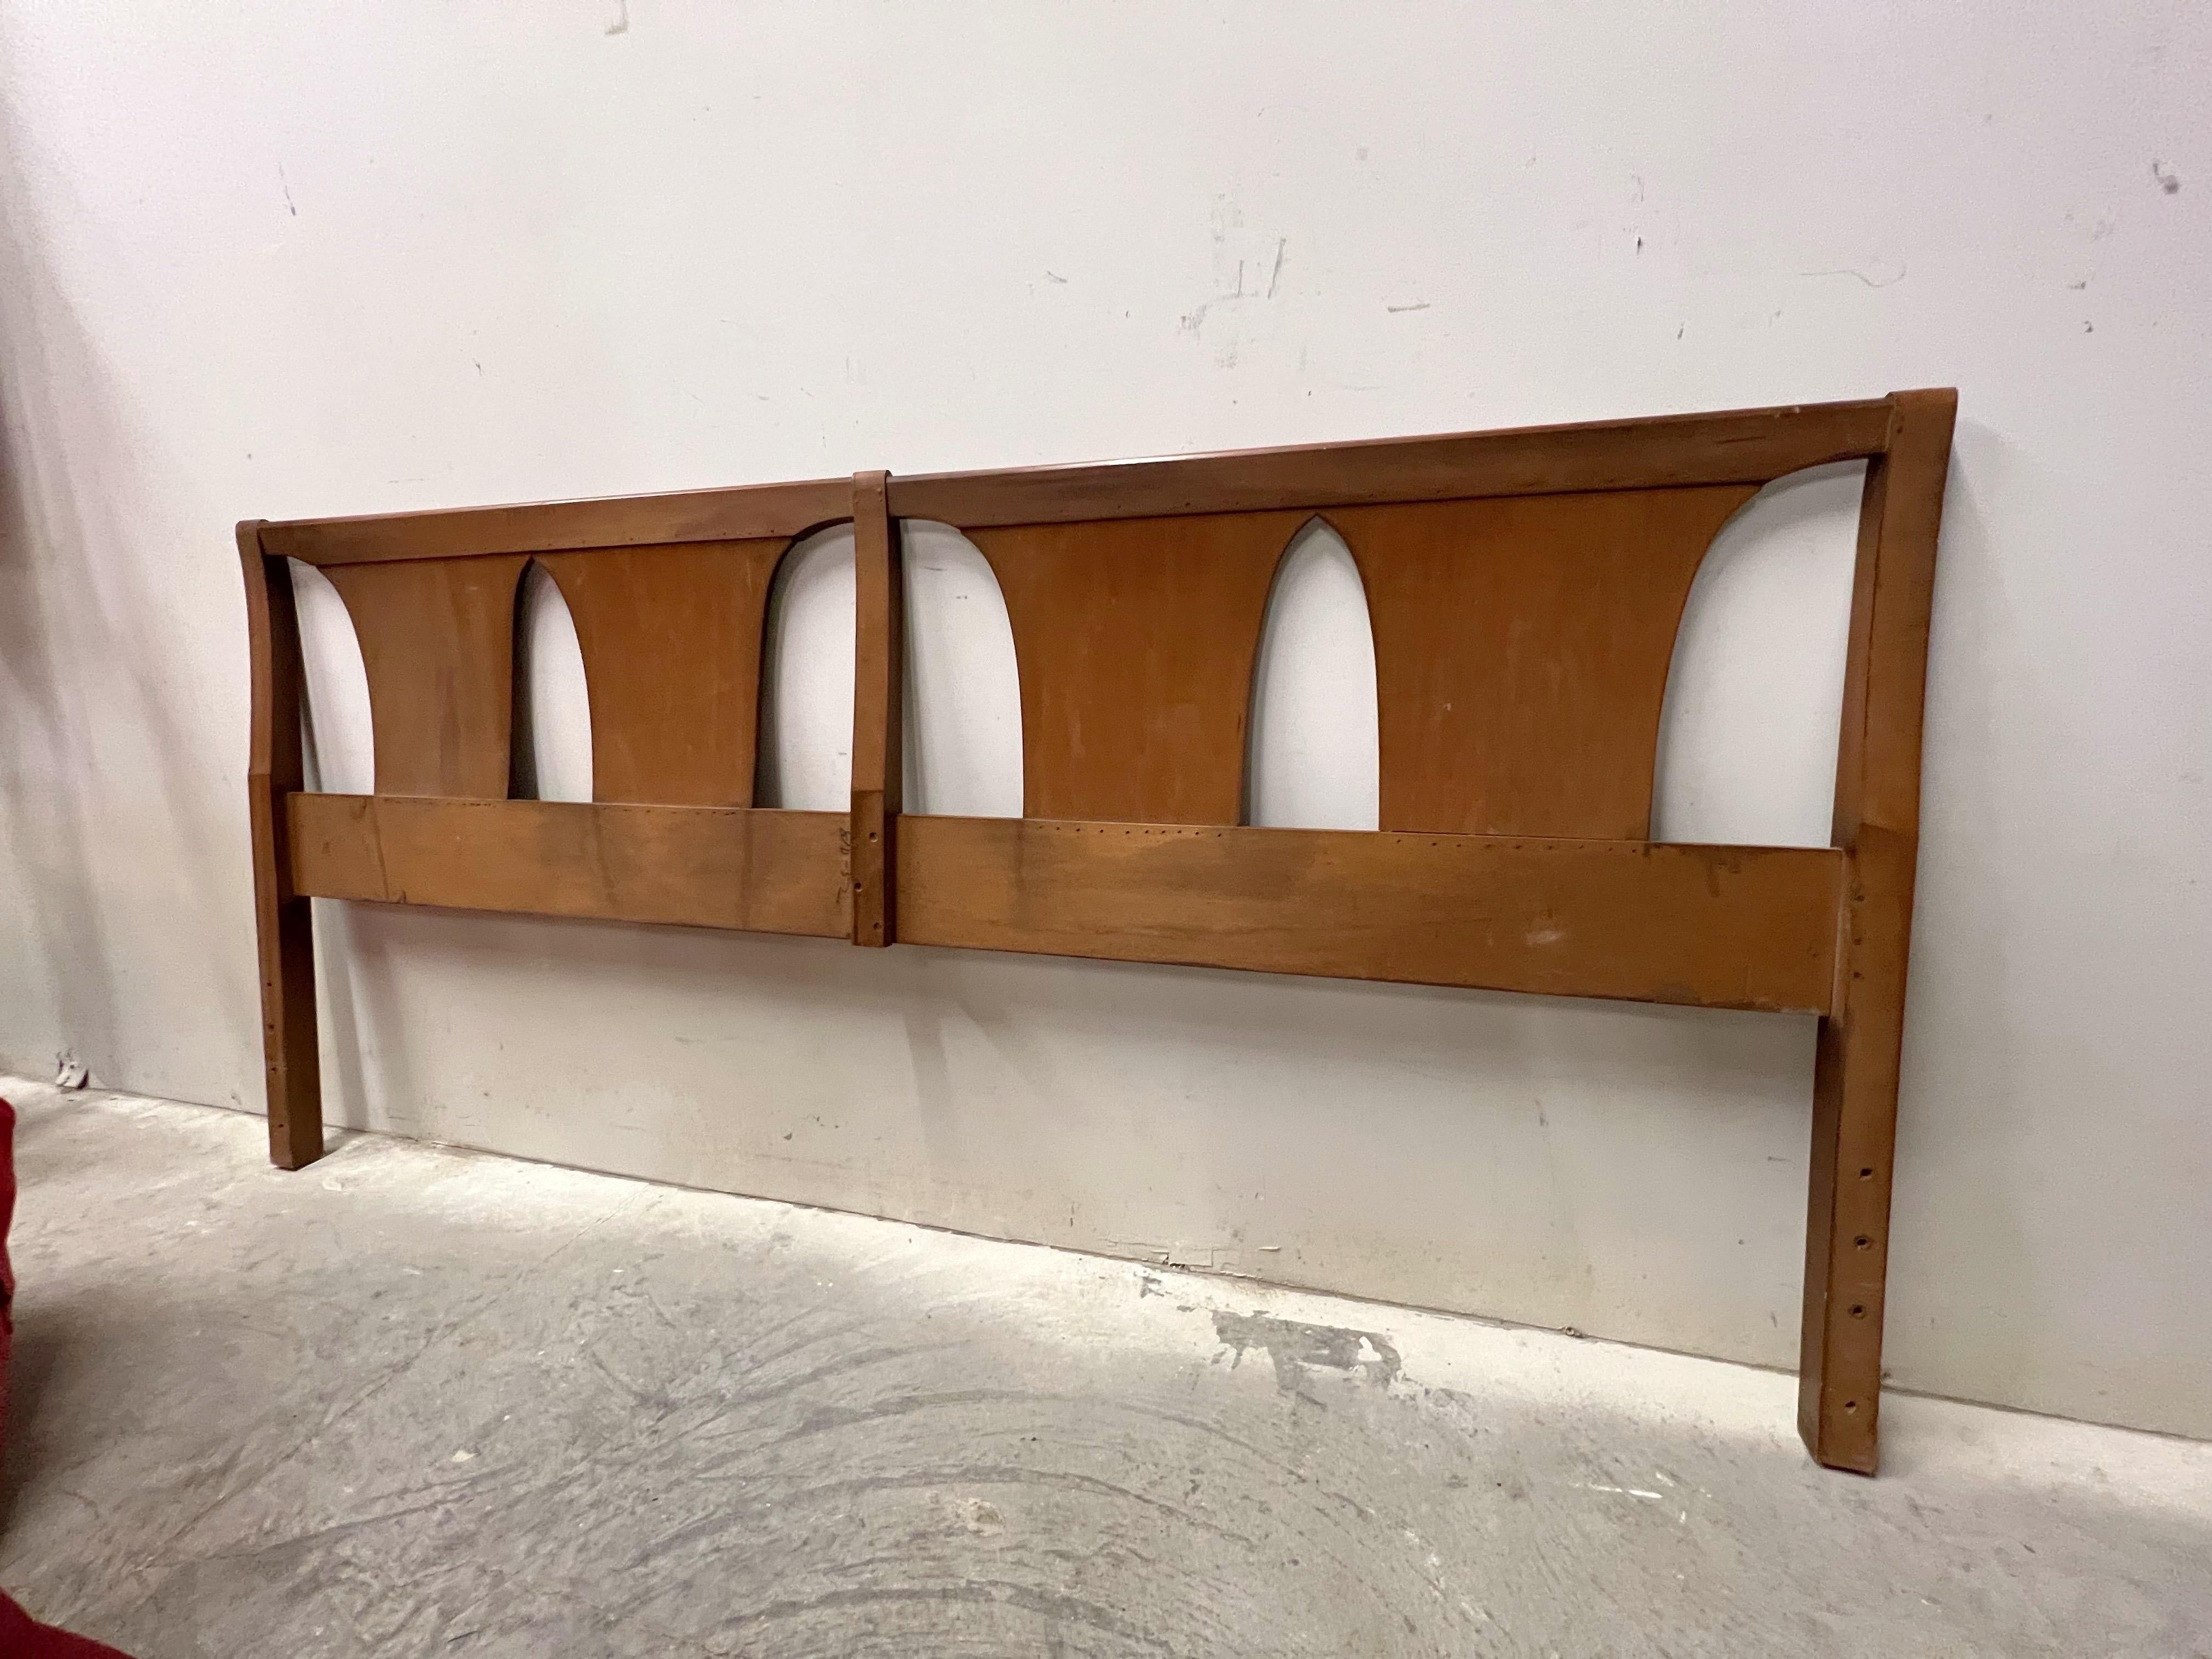 Here we have a richly grained walnut king size headboard with 4 inverted slats.  A fabulous modern shape and very much in the style of Kent Coffey.